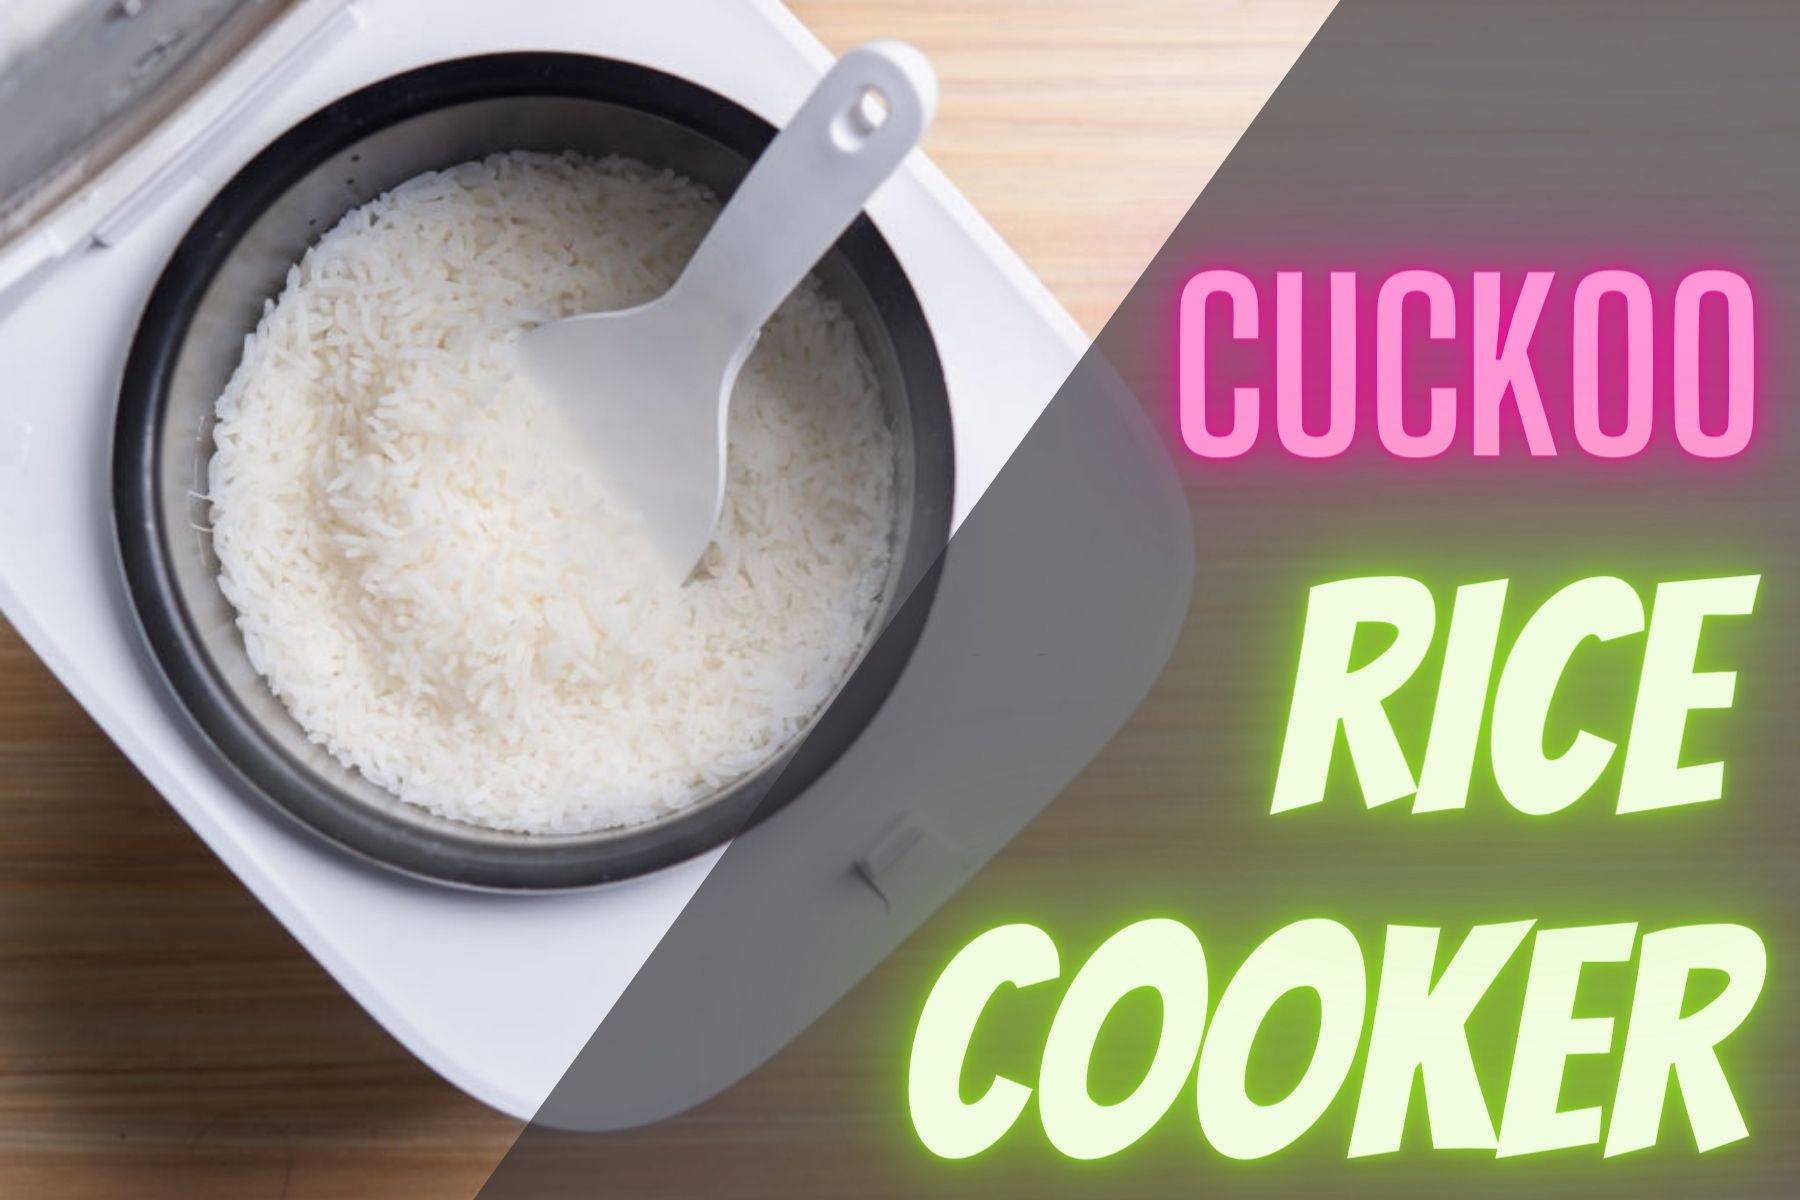 Cockoo rice cooker